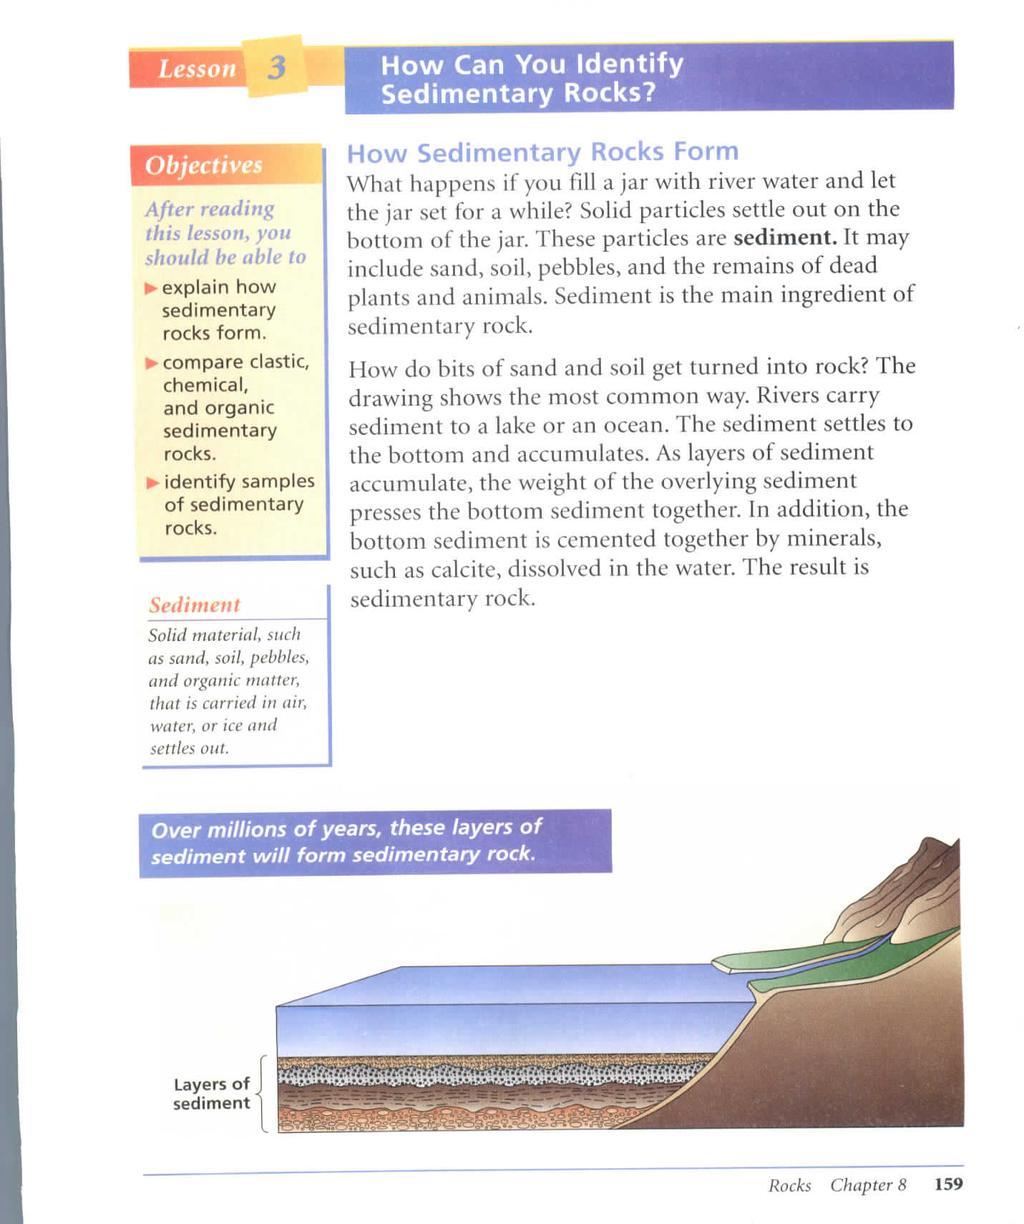 Lesson Objectives After reading this lesson, you should be able to explain how sedimentary rocks form. compare clastic, chemical, and organic sedimentary rocks. identify samples of sedimentary rocks.